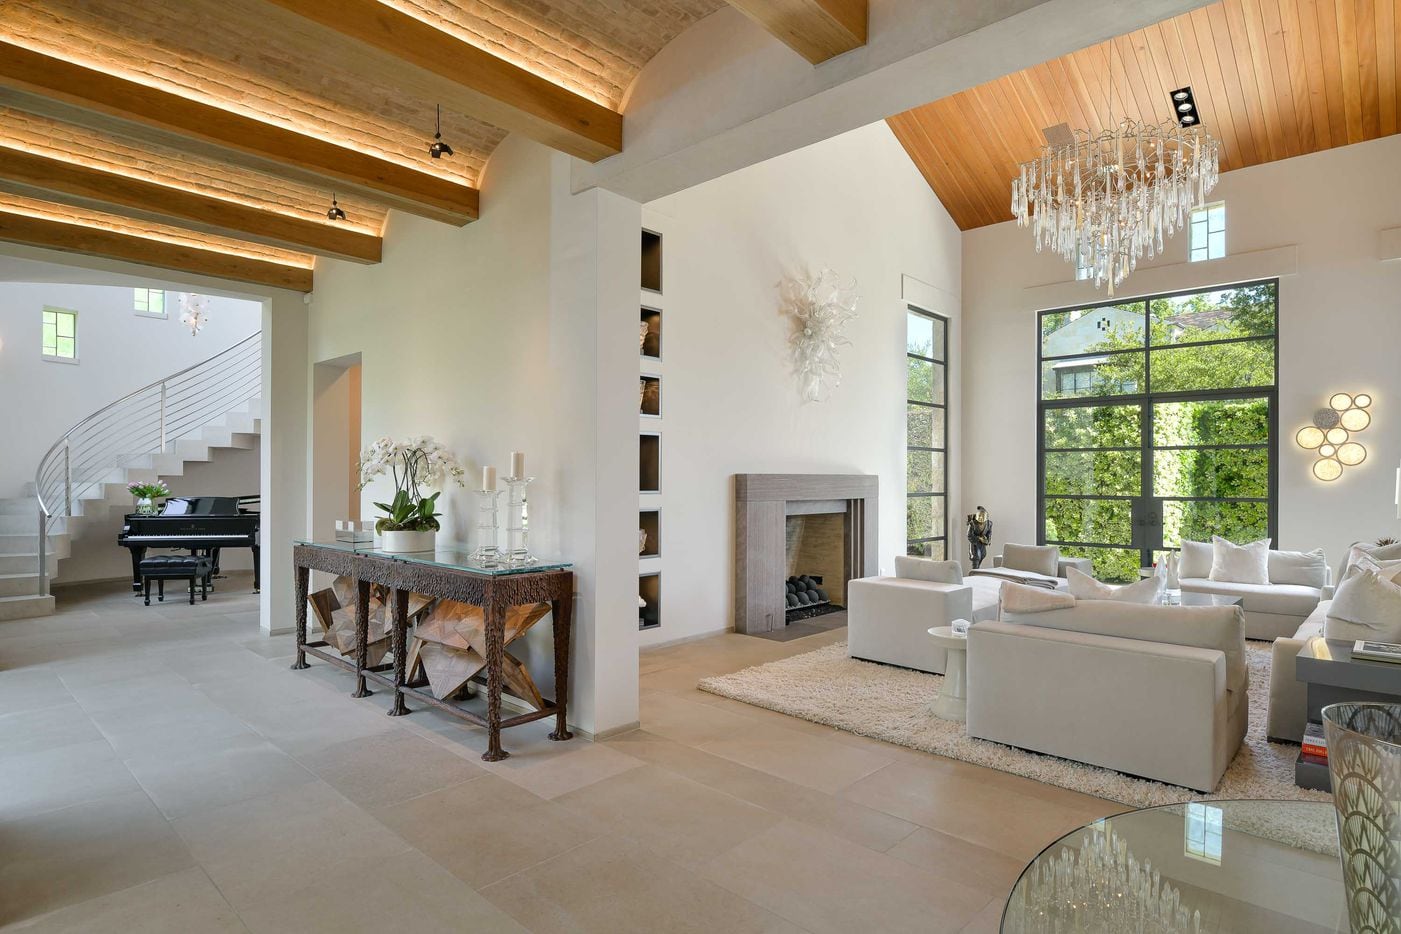 Take a look at this custom designed home at 3701 Lexington Ave. in Dallas, TX.